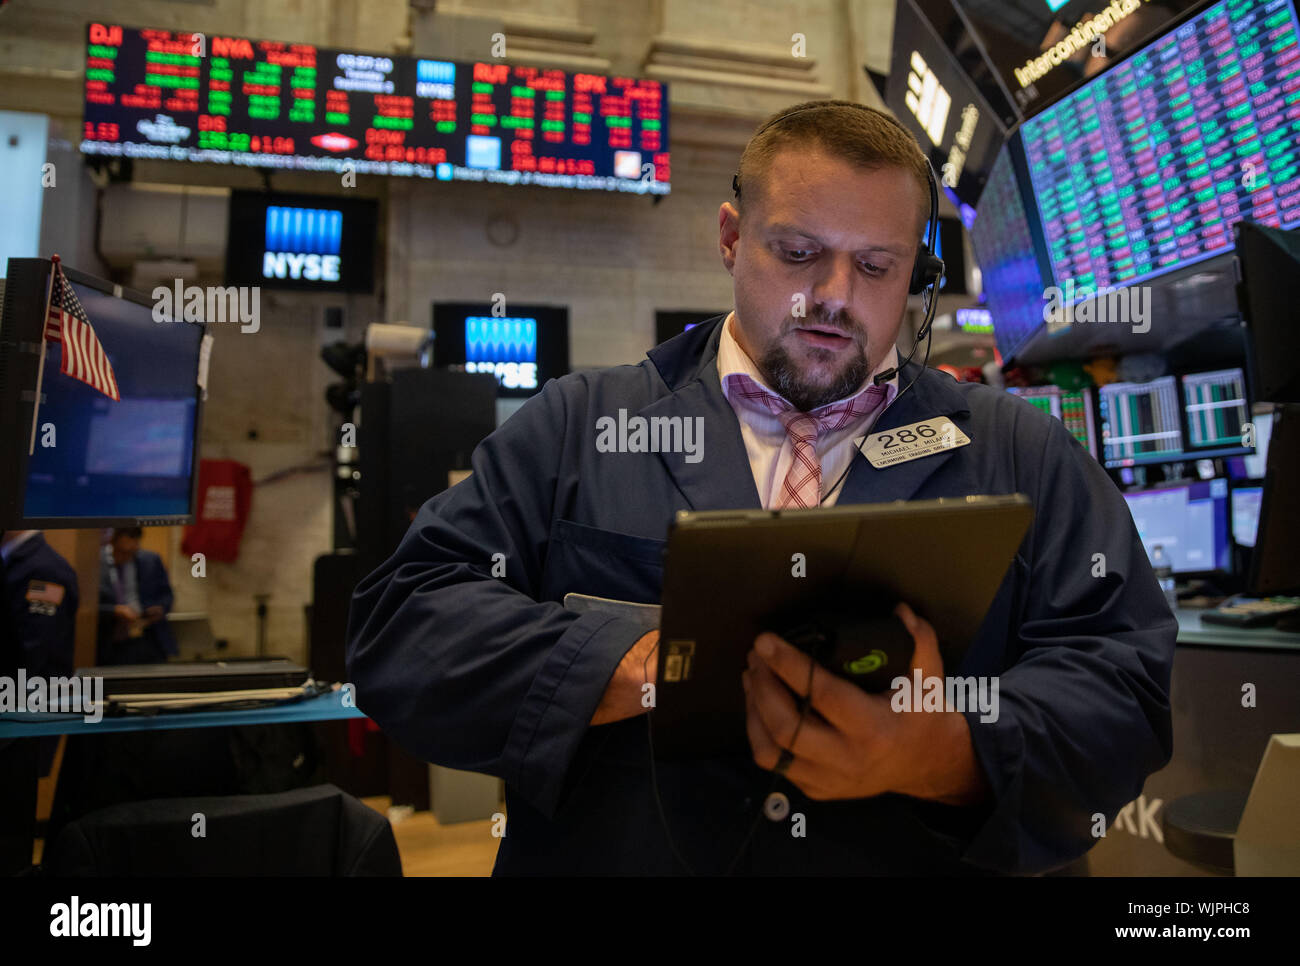 New York, USA. 3rd Sep, 2019. A trader works at the New York Stock Exchange in New York, the United States, on Sept. 3, 2019. U.S. stocks closed lower on Tuesday. The Dow Jones Industrial Average fell 285.26 points, or 1.08 percent, to 26,118.02. The S&P 500 was down 20.19 points, or 0.69 percent, to 2,906.27. The Nasdaq Composite Index fell 88.72 points, or 1.11 percent, to 7,874.16. Credit: Guo Peiran/Xinhua/Alamy Live News Stock Photo